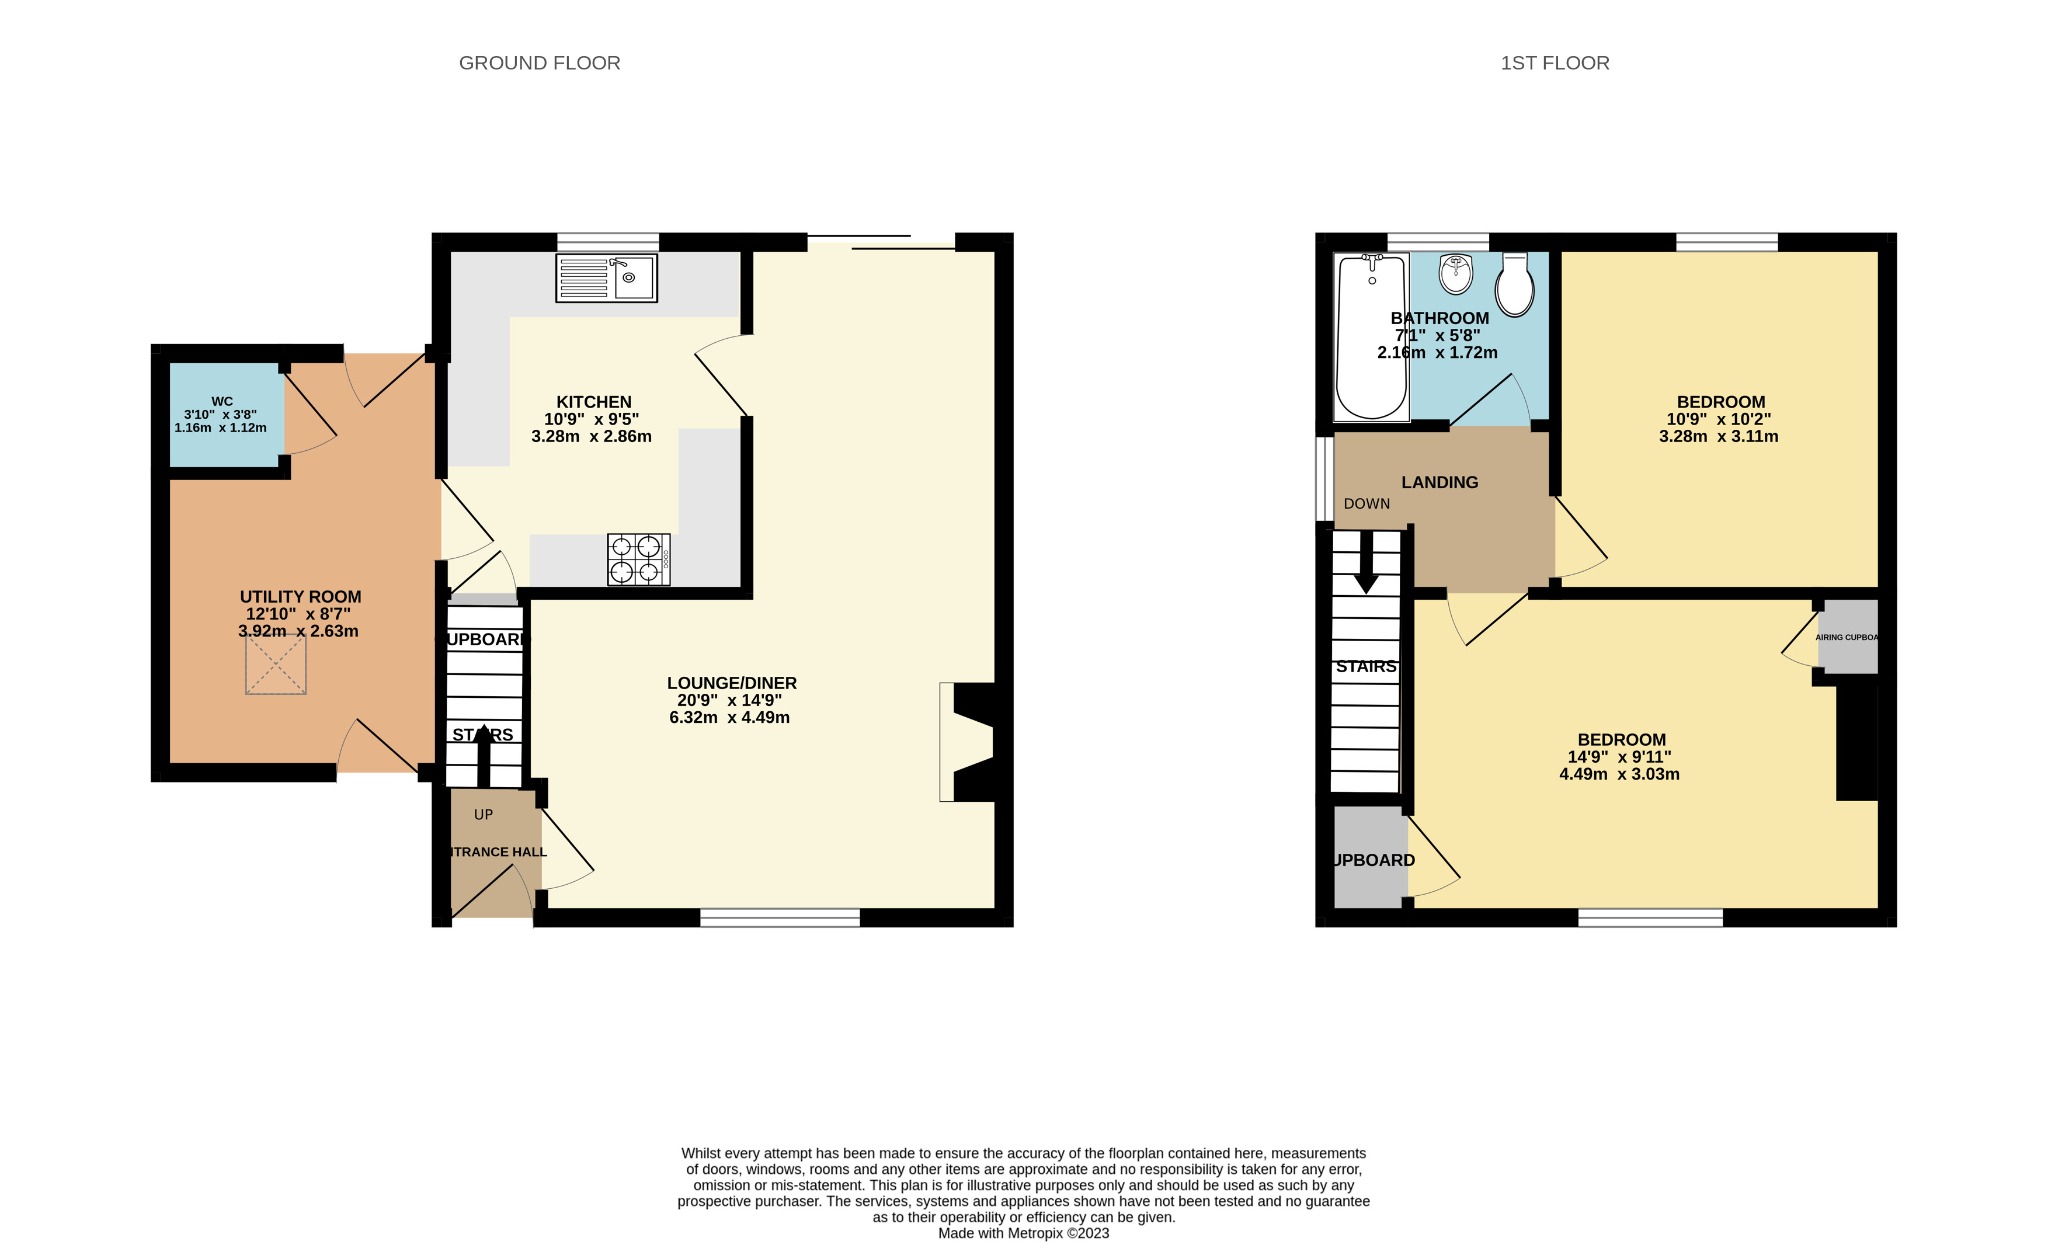 2 bed semi-detached house for sale in Gough Crescent, Poole - Property floorplan